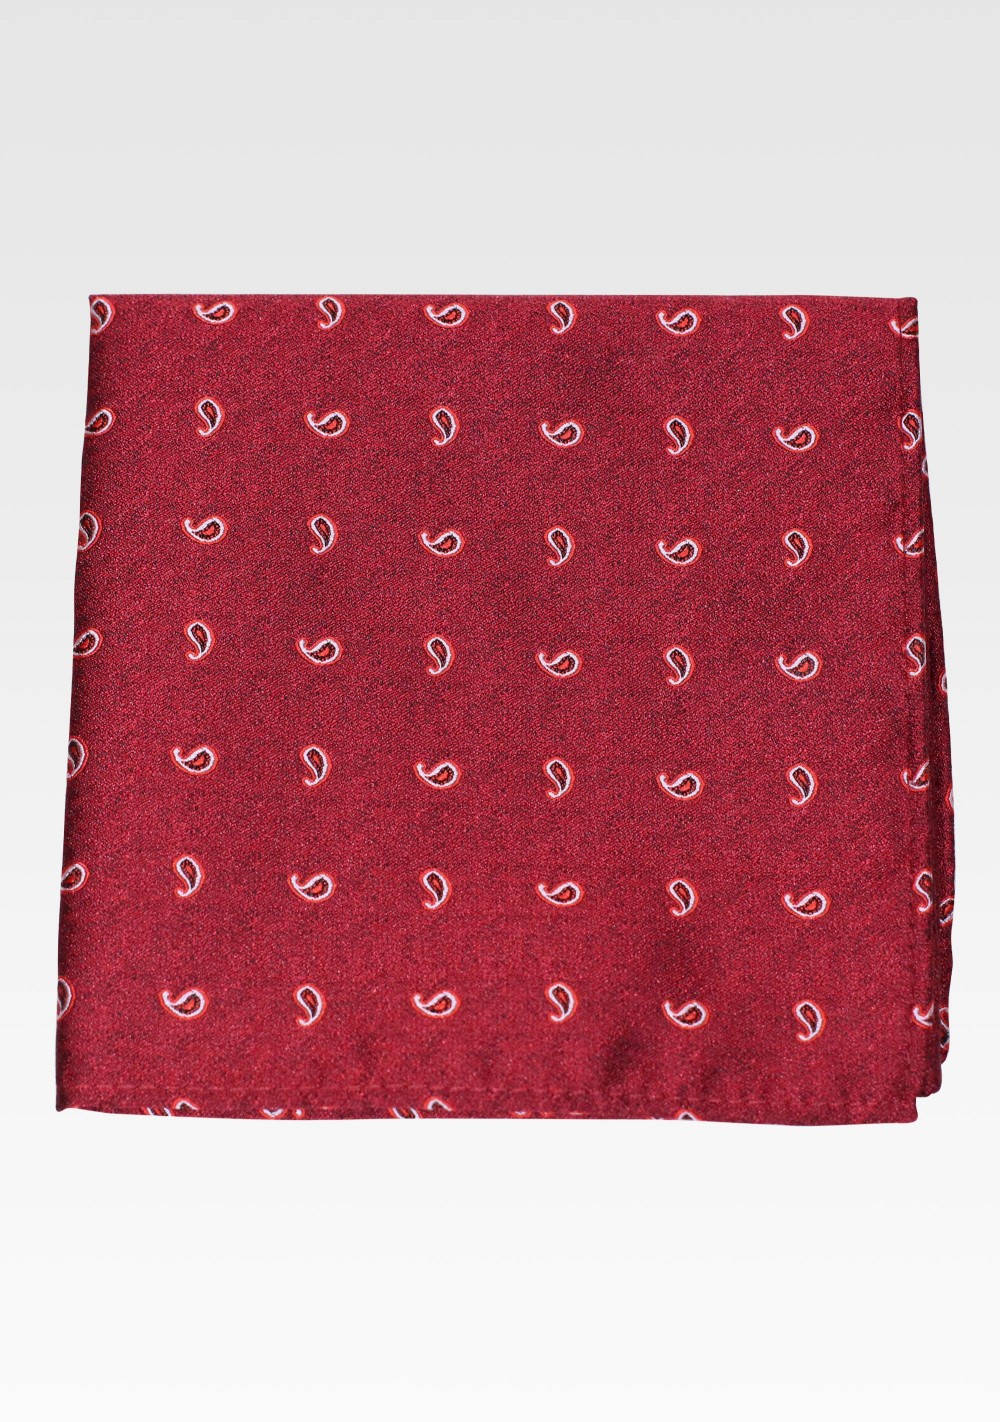 Scarlet Red Paisley Pocket Square